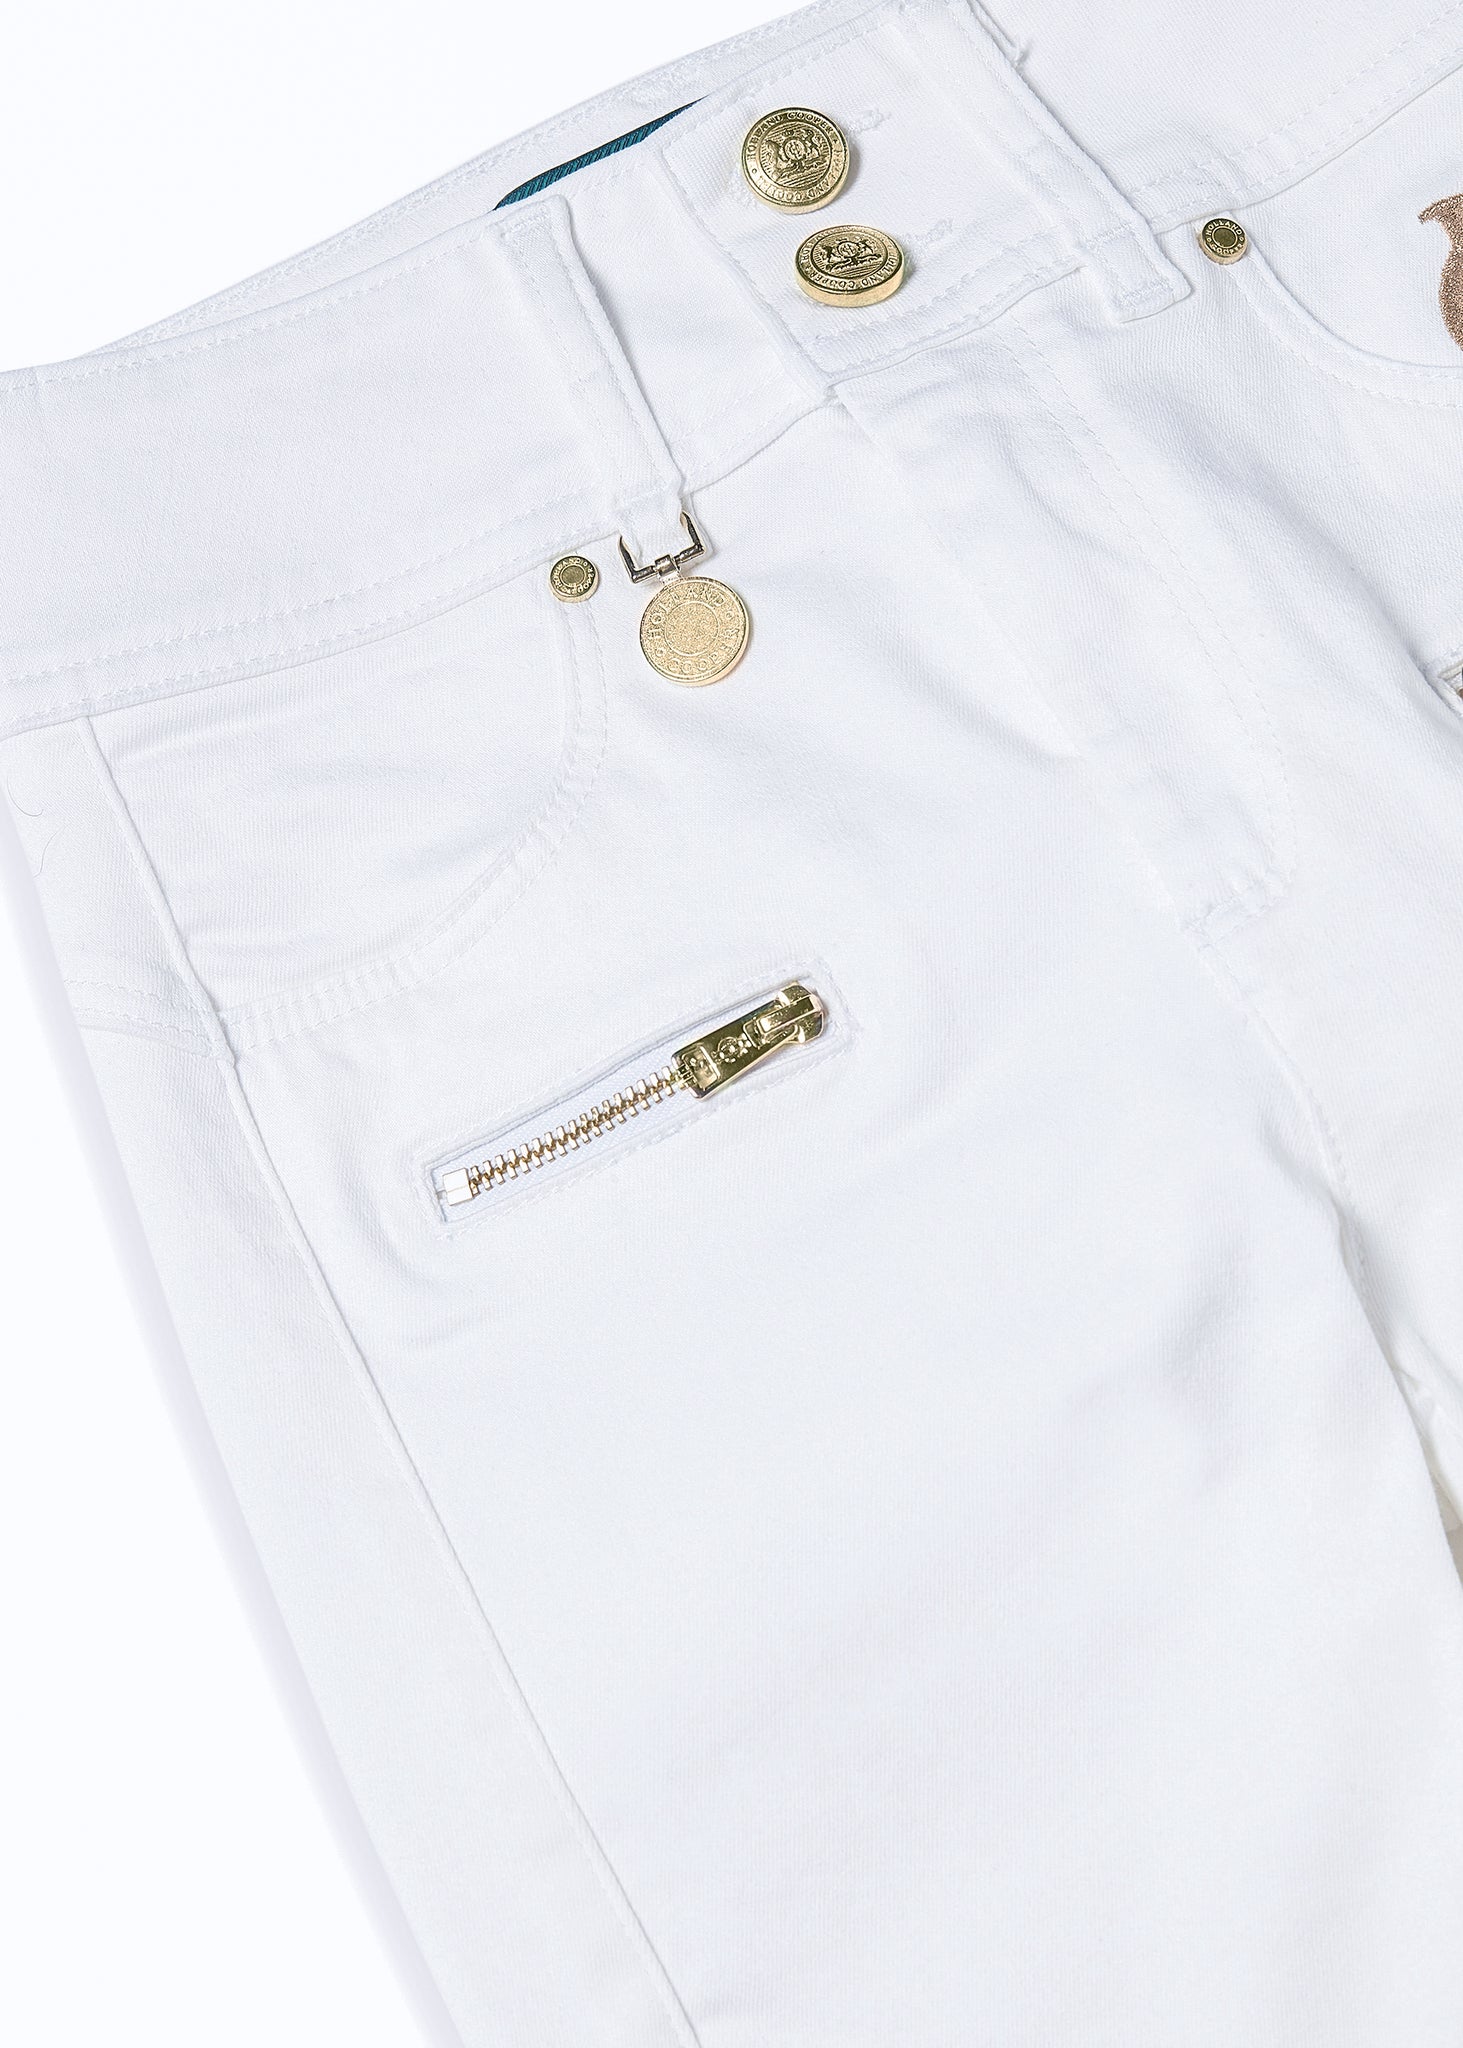 front pocket detail on womens high rise white skinny stretch jean with pin tuck biker panels to front and two open zip pockets on front with HC embroidery to left pocket facing